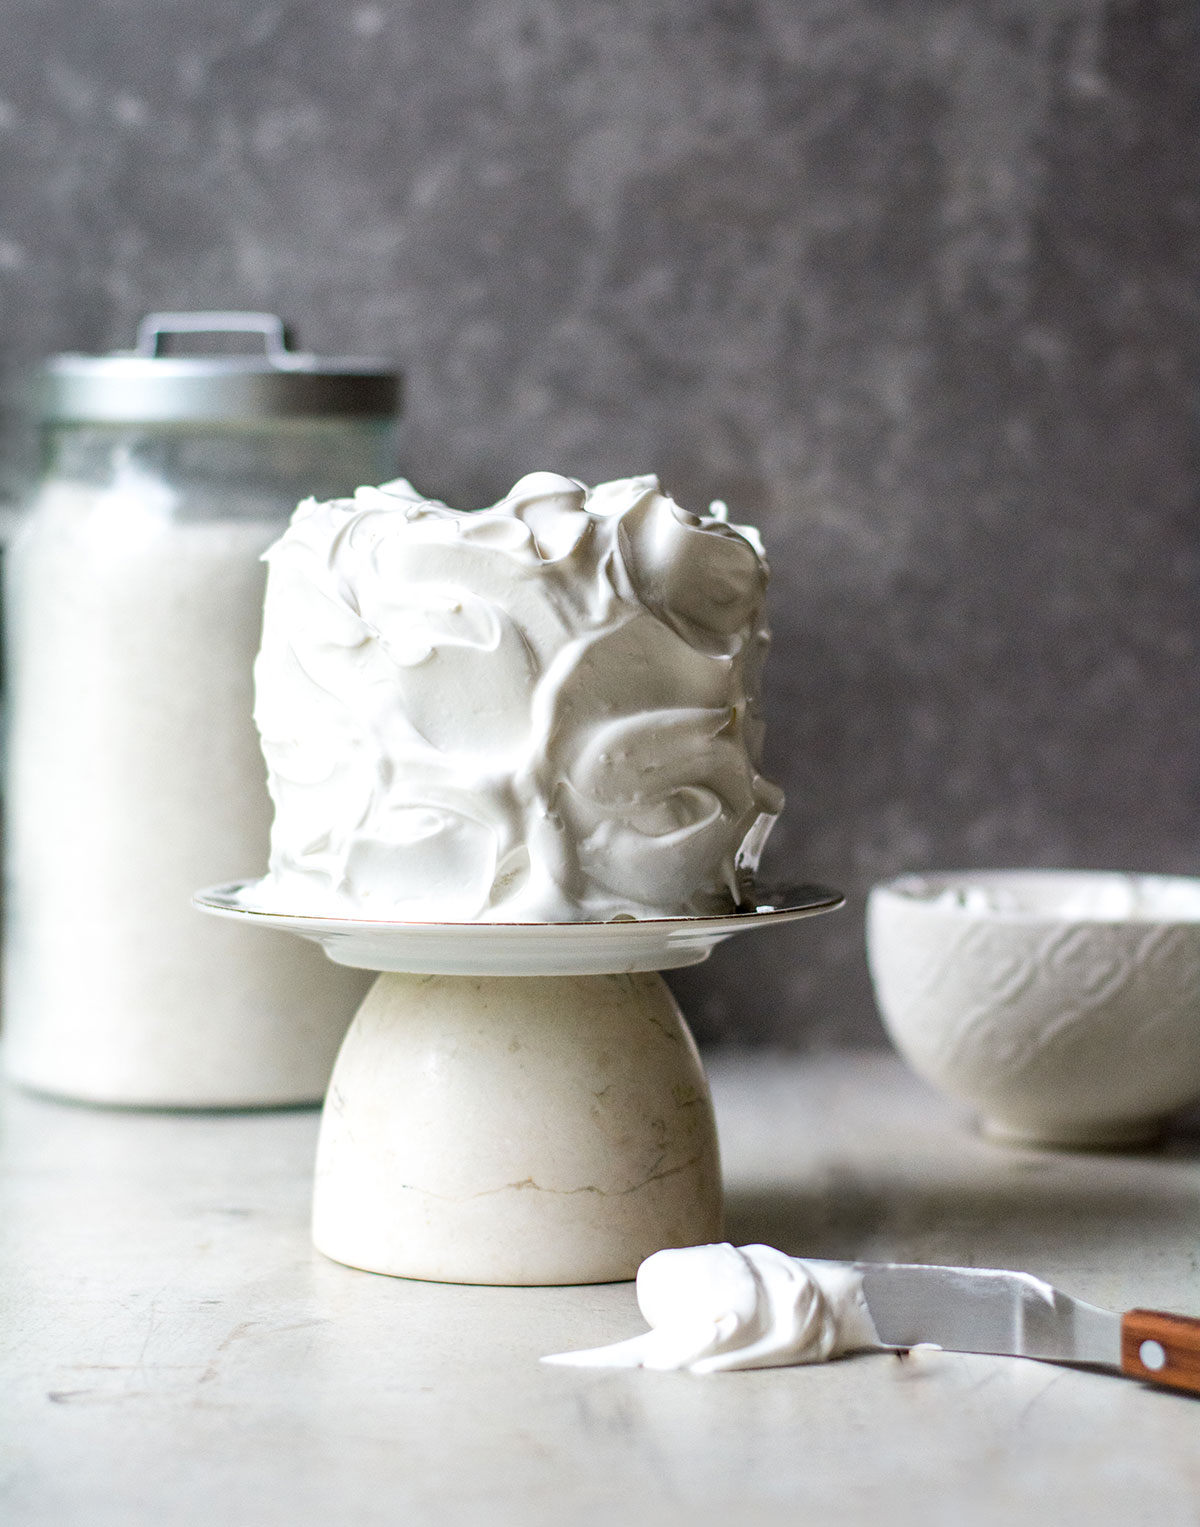 frosted meringue cake before toasting